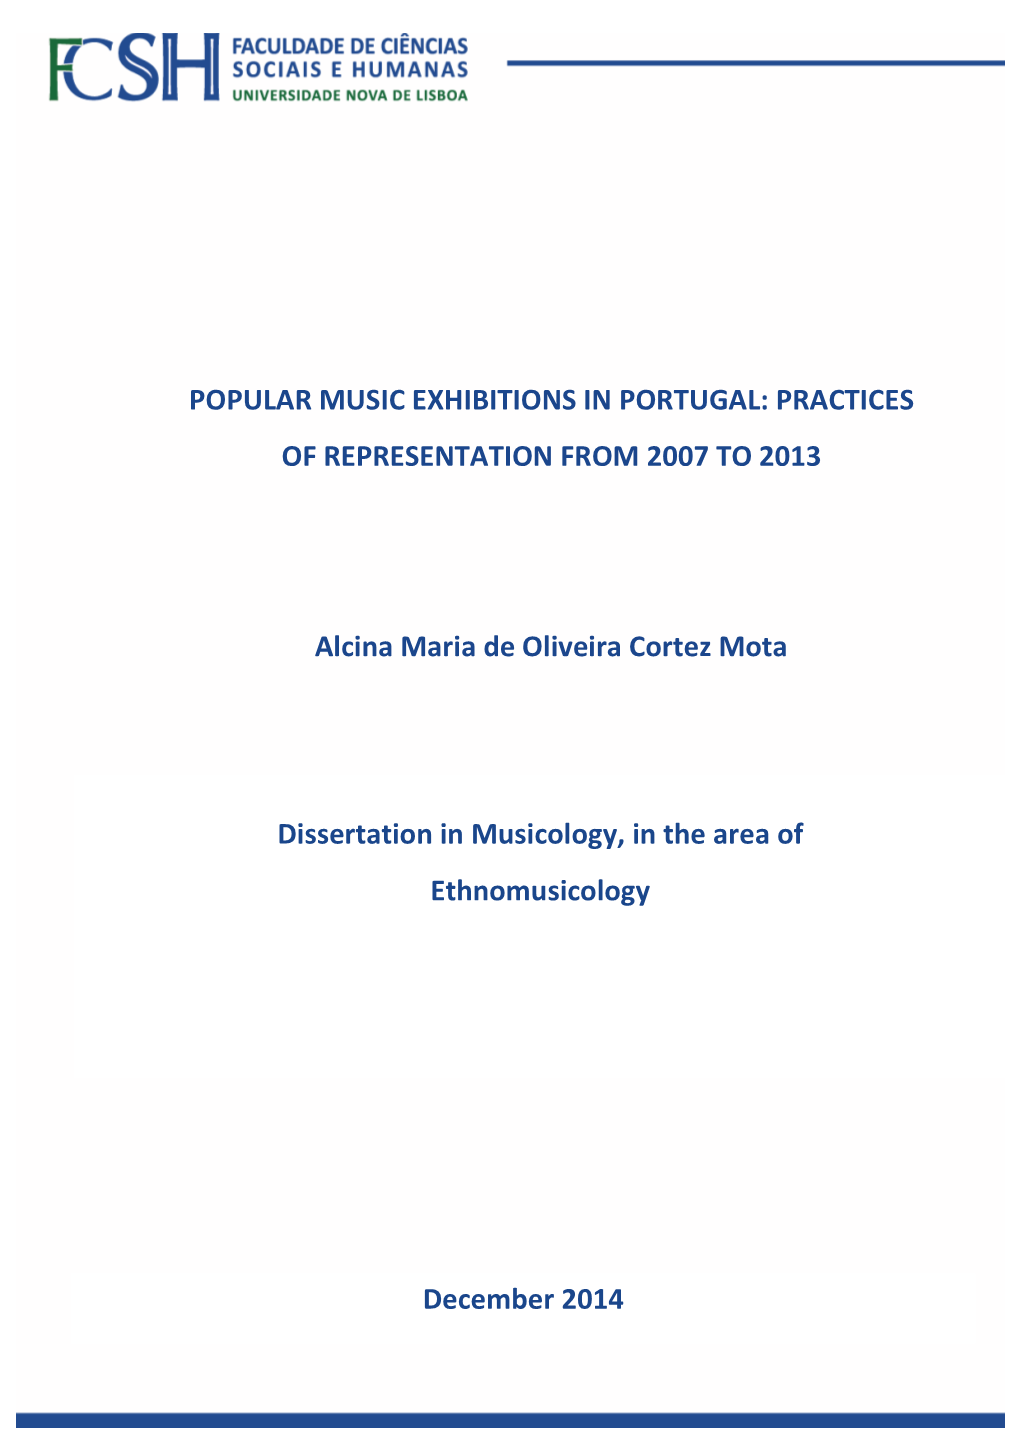 Popular Music Exhibitions in Portugal: Practices of Representation from 2007 to 2013